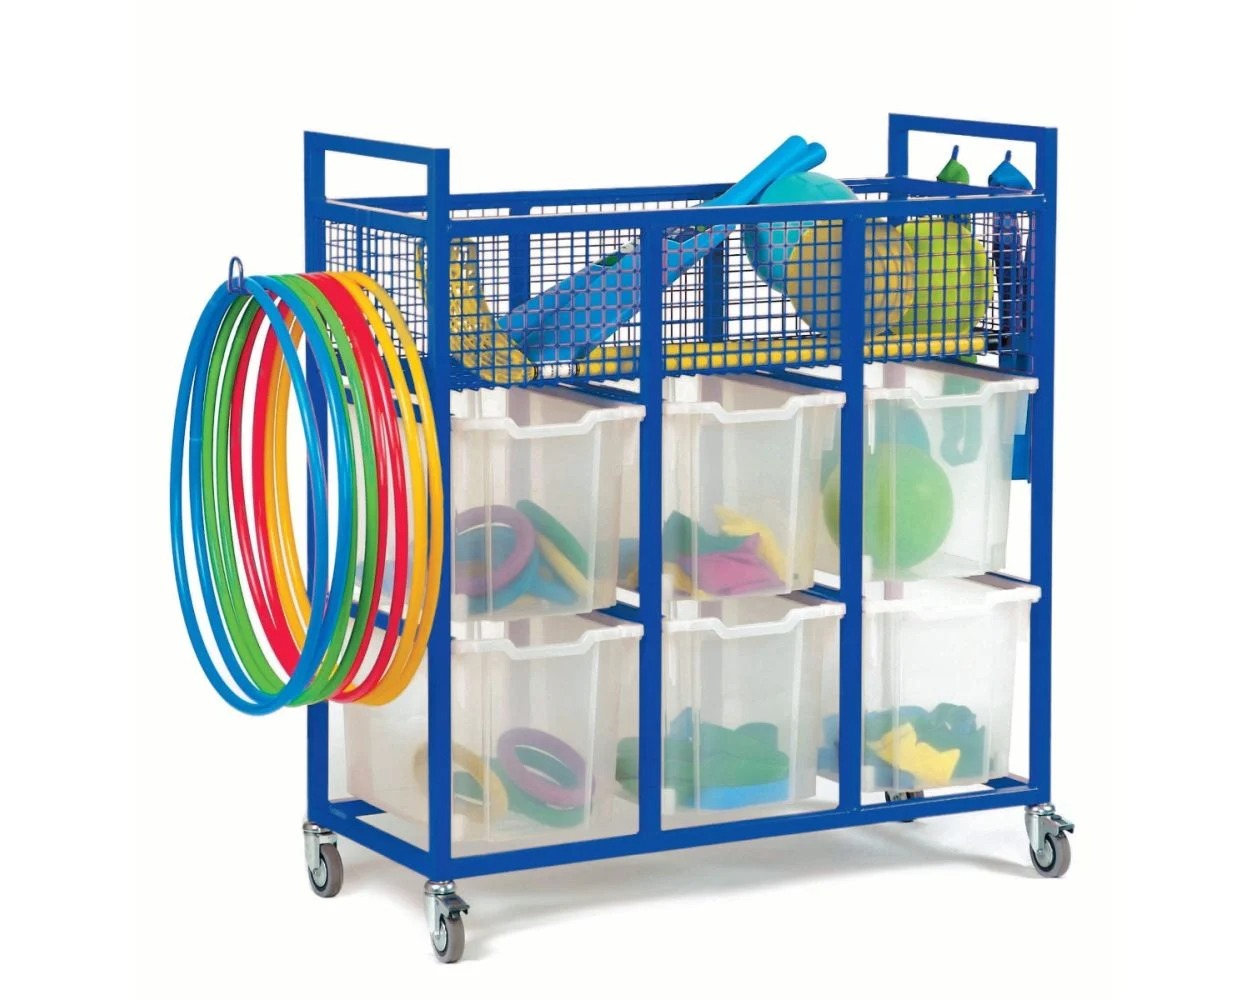 Monarch School Sports Trolley with 6 Jumbo Trays, The Monarch School Sports Trolley with 6 Jumbo Trays is the perfect storage and transportation solution for all your P.E. and sports equipment needs. Whether you're a school, sports club, or gym, this colorful and handy trolley is designed to make organizing and moving equipment a breeze.Delivered fully assembled and complete with 6x jumbo Gratnells trays, this trolley is ready to use right out of the box. The trays provide ample storage space for all your s